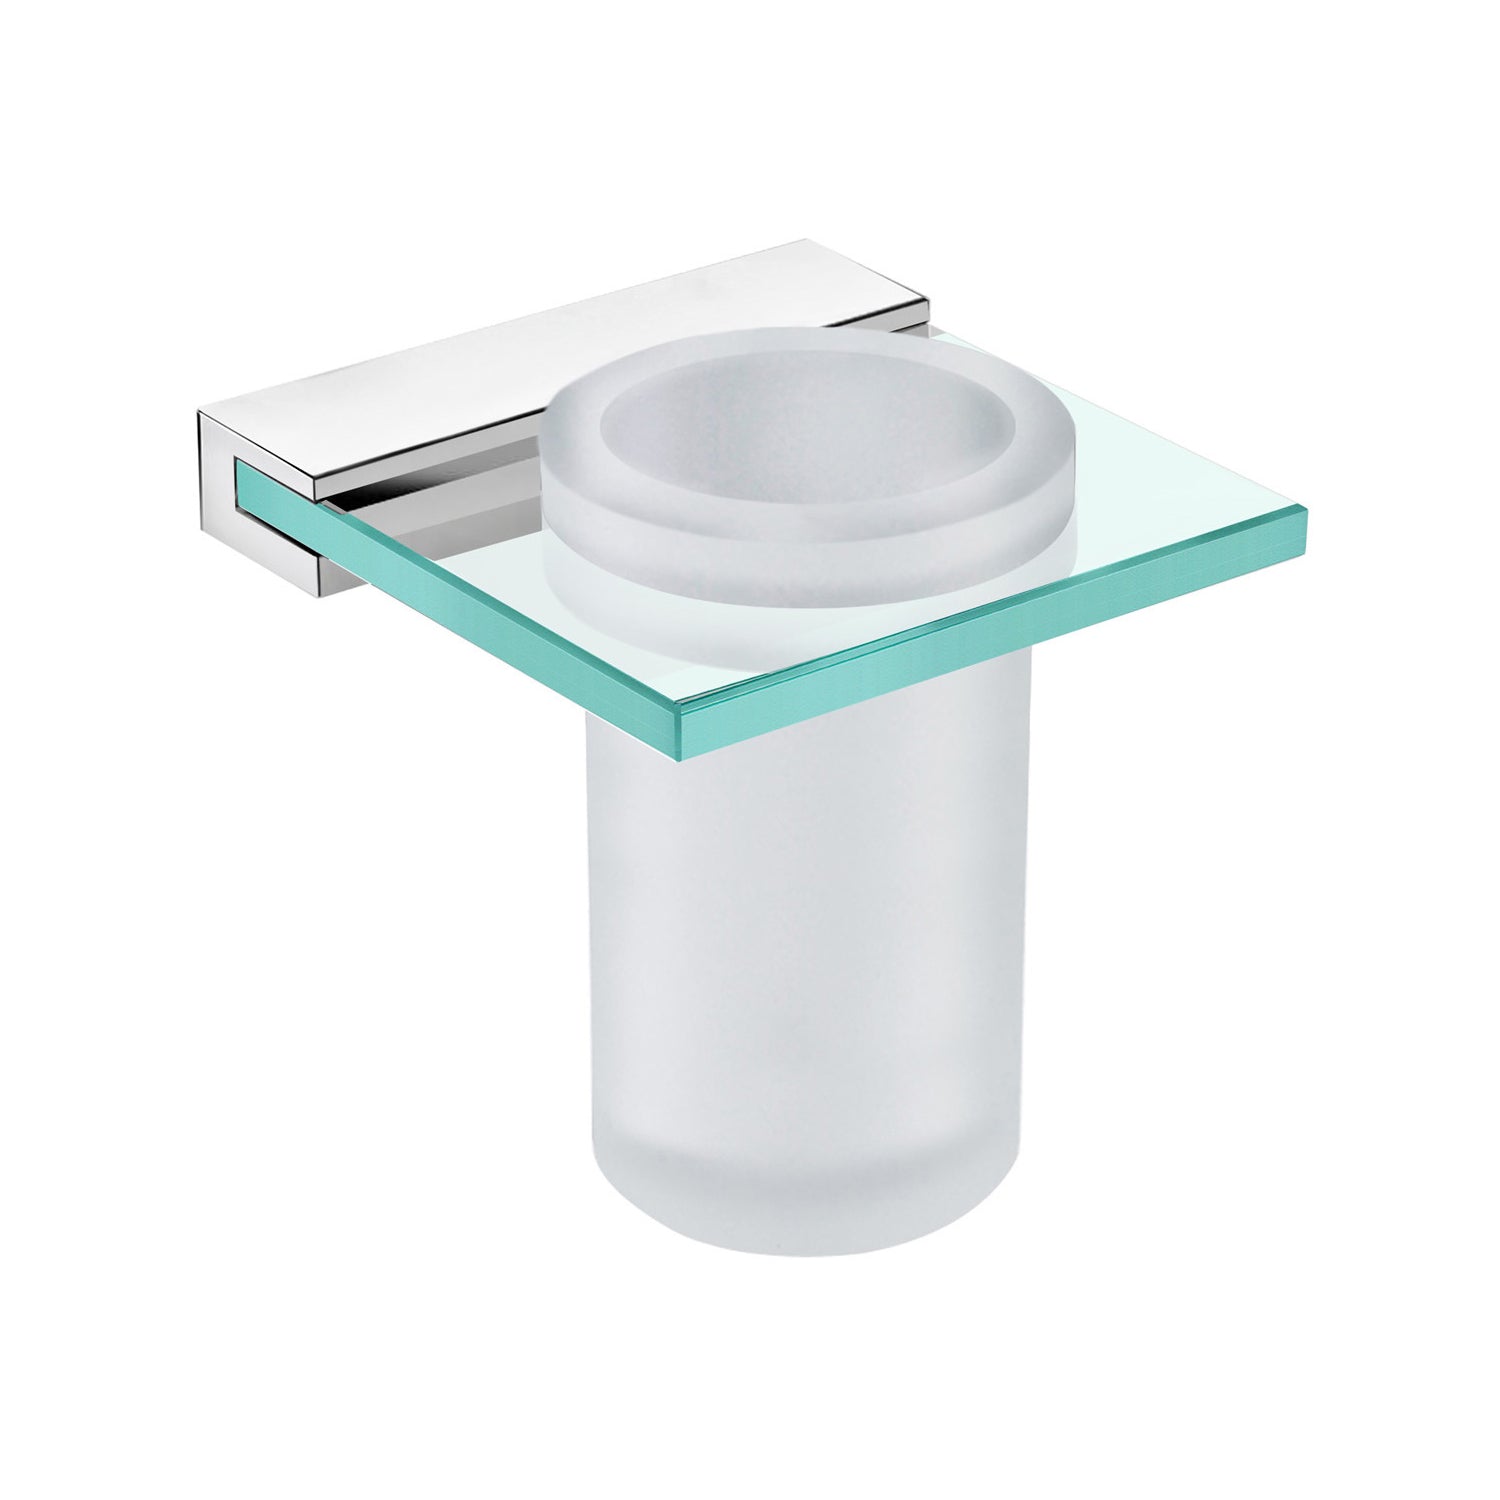 DAX Venice Bathroom Single Tumbler Toothbrush Holder, Wall Mount, Tempered Glass Cup with Clear Glass, Brushed Finish, 4-5/16 x 4-5/16 x 4-1/2 Inches (DAX-GDC060152-BN)